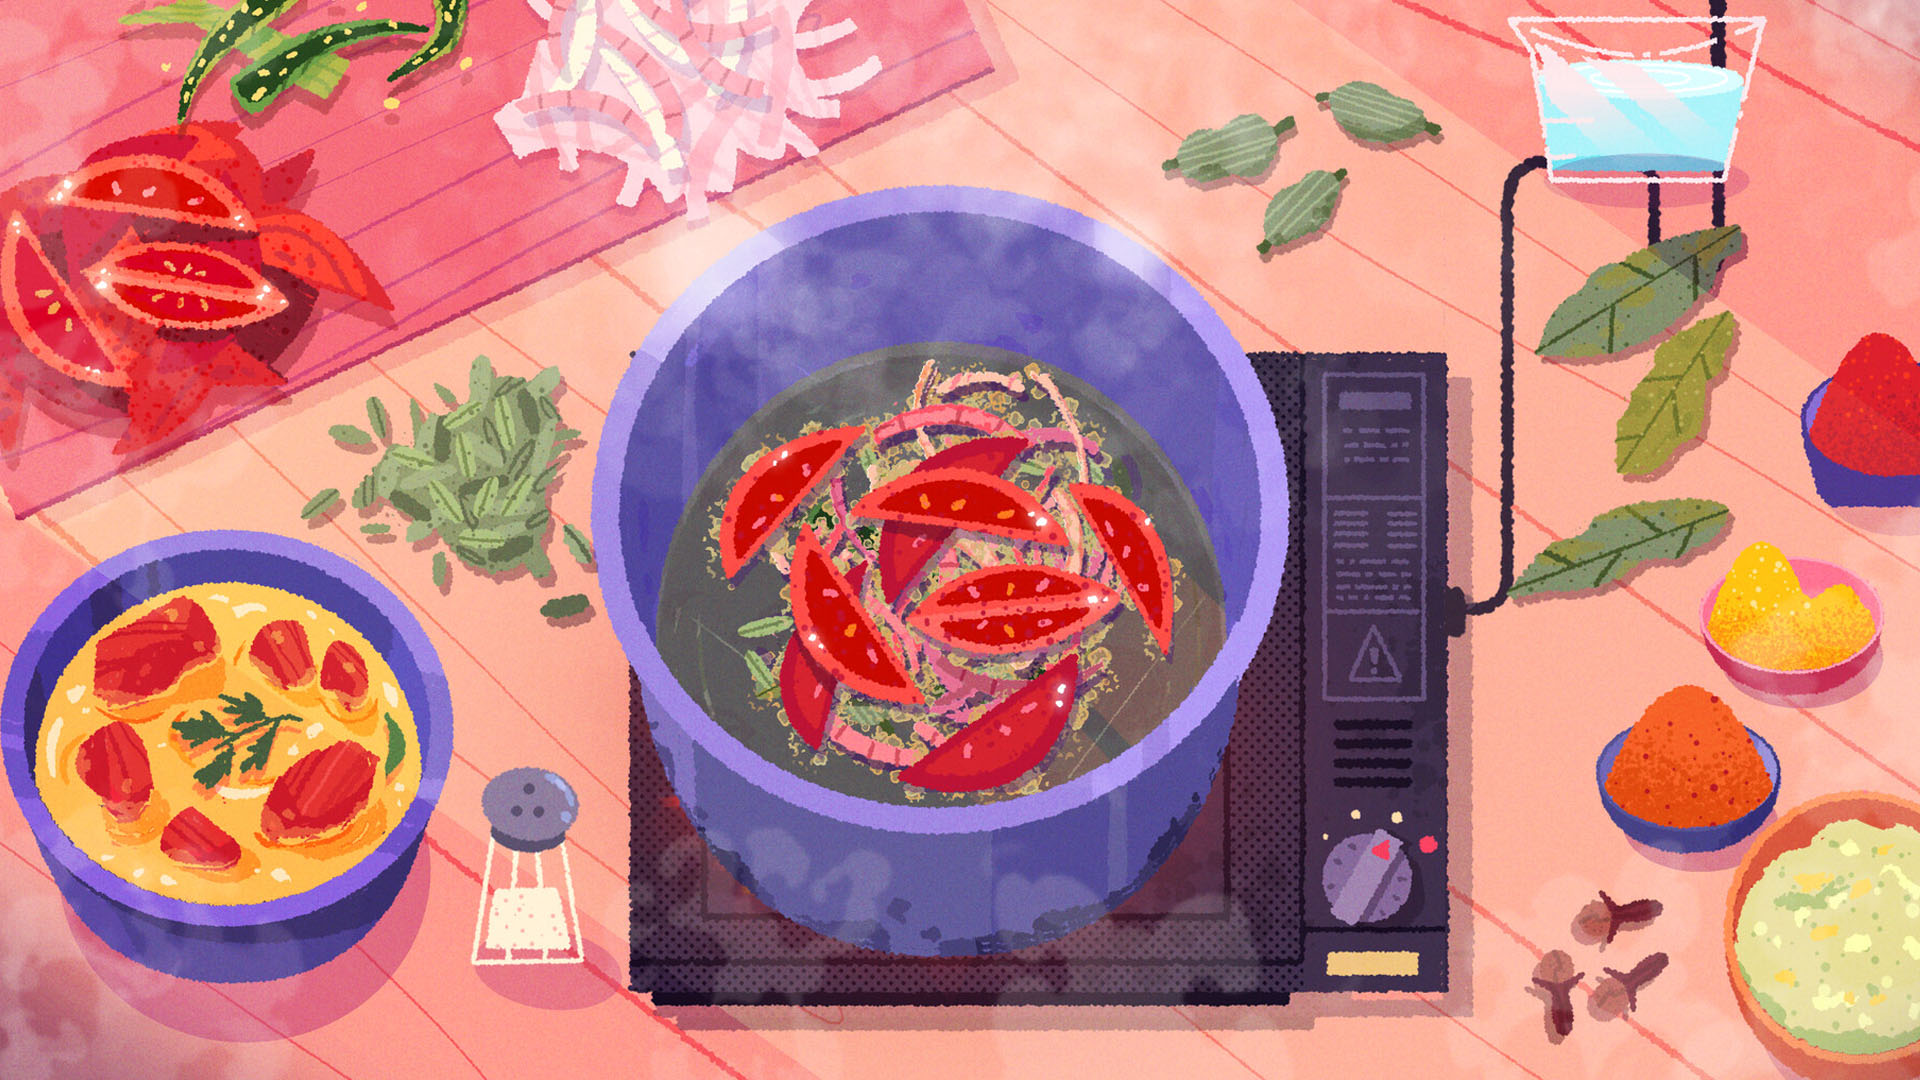 The Cooking Game no Steam